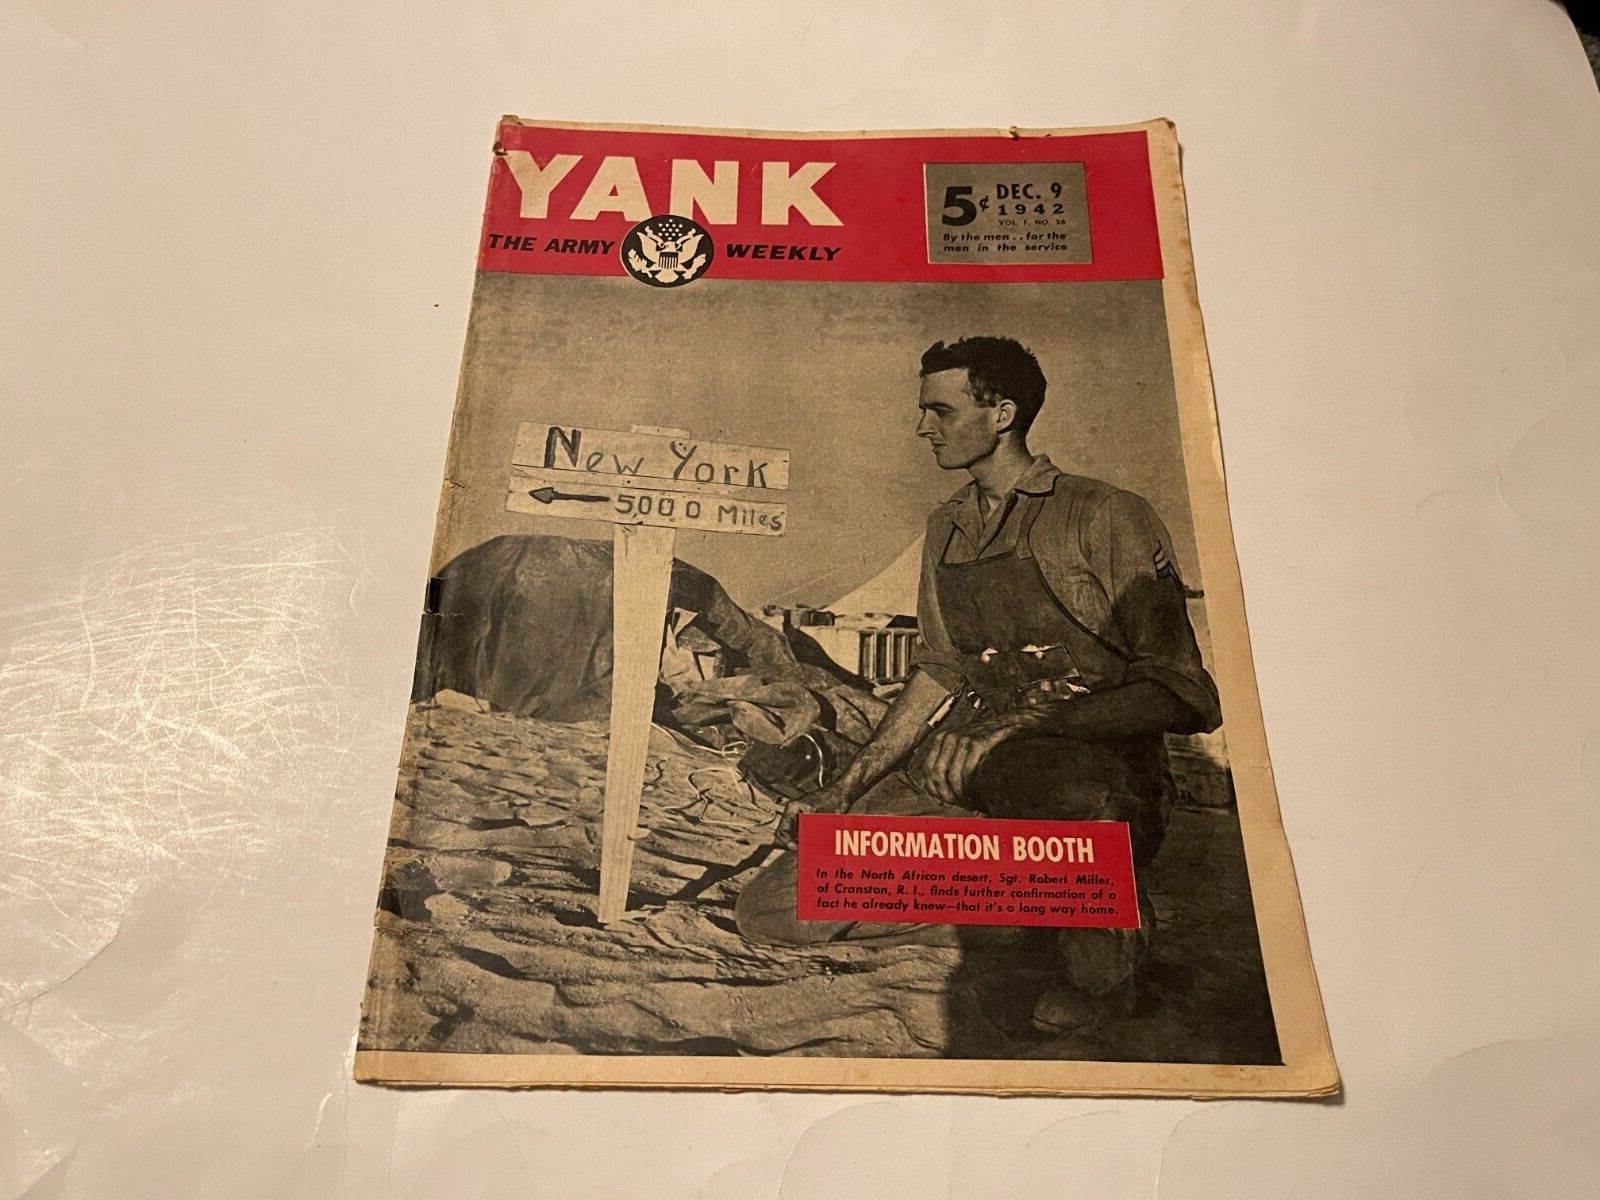 YANK The Army Weekly December 27, 1942 - Information Booth